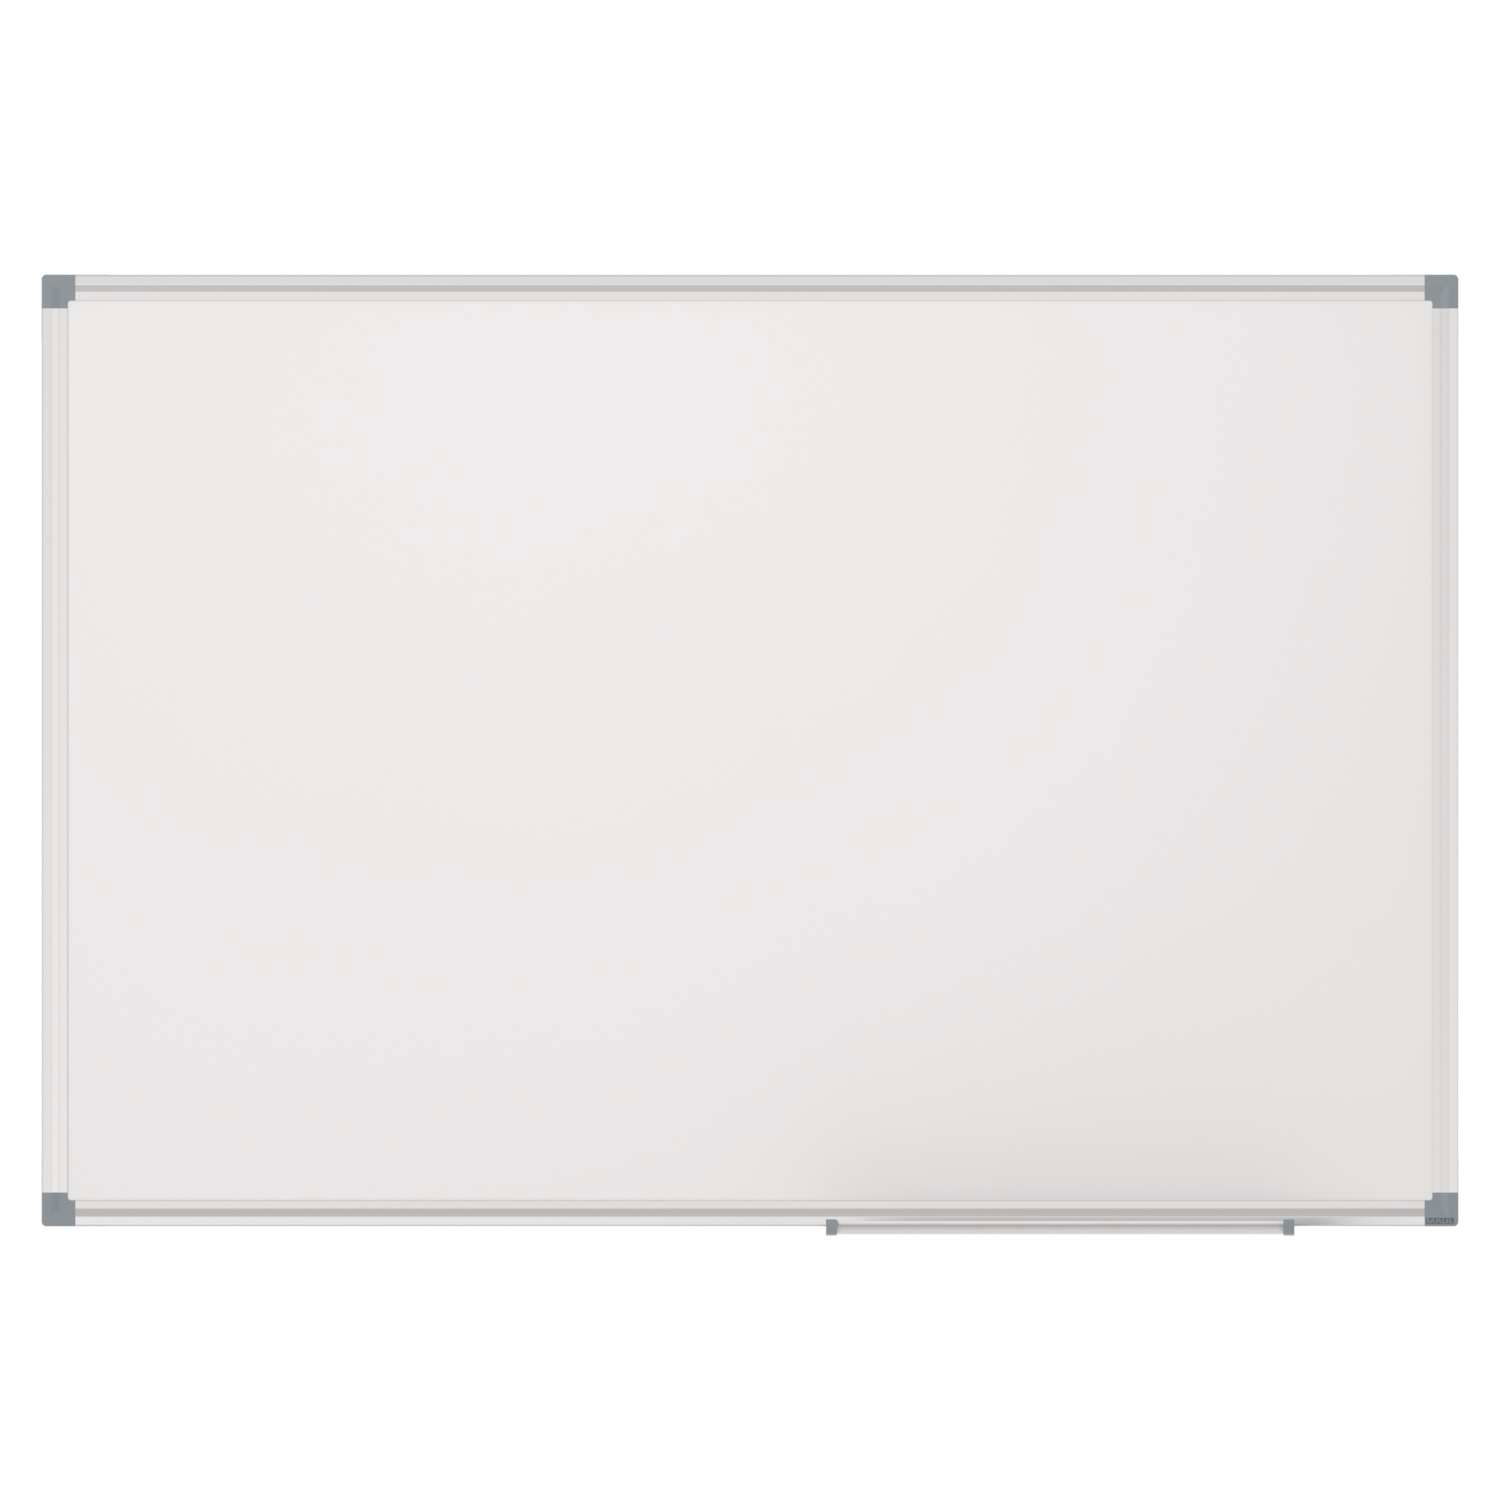 Whiteboard MAULstandard, Emaille, 120x180 cm